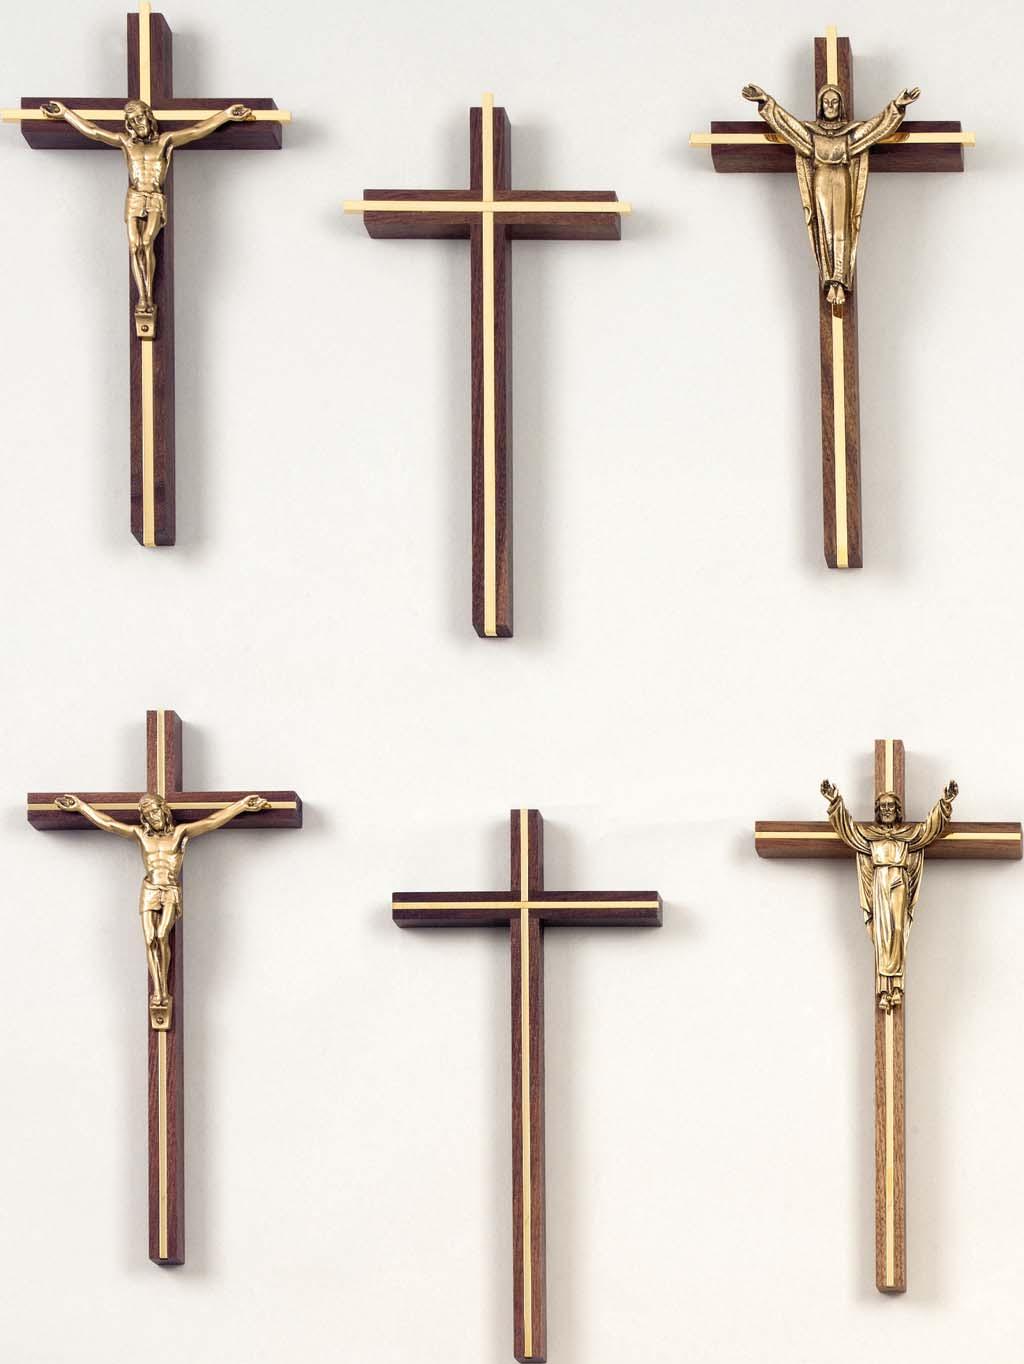 Brass Inlay Crucifixes and Crosses C234/5001-L 24 KT. Gold Plated Wide Brass Inlay Metal Figure 4 1 /2" C234/5000 24 KT. Gold Plated Wide Brass Inlay C234/5002-L 24 KT.